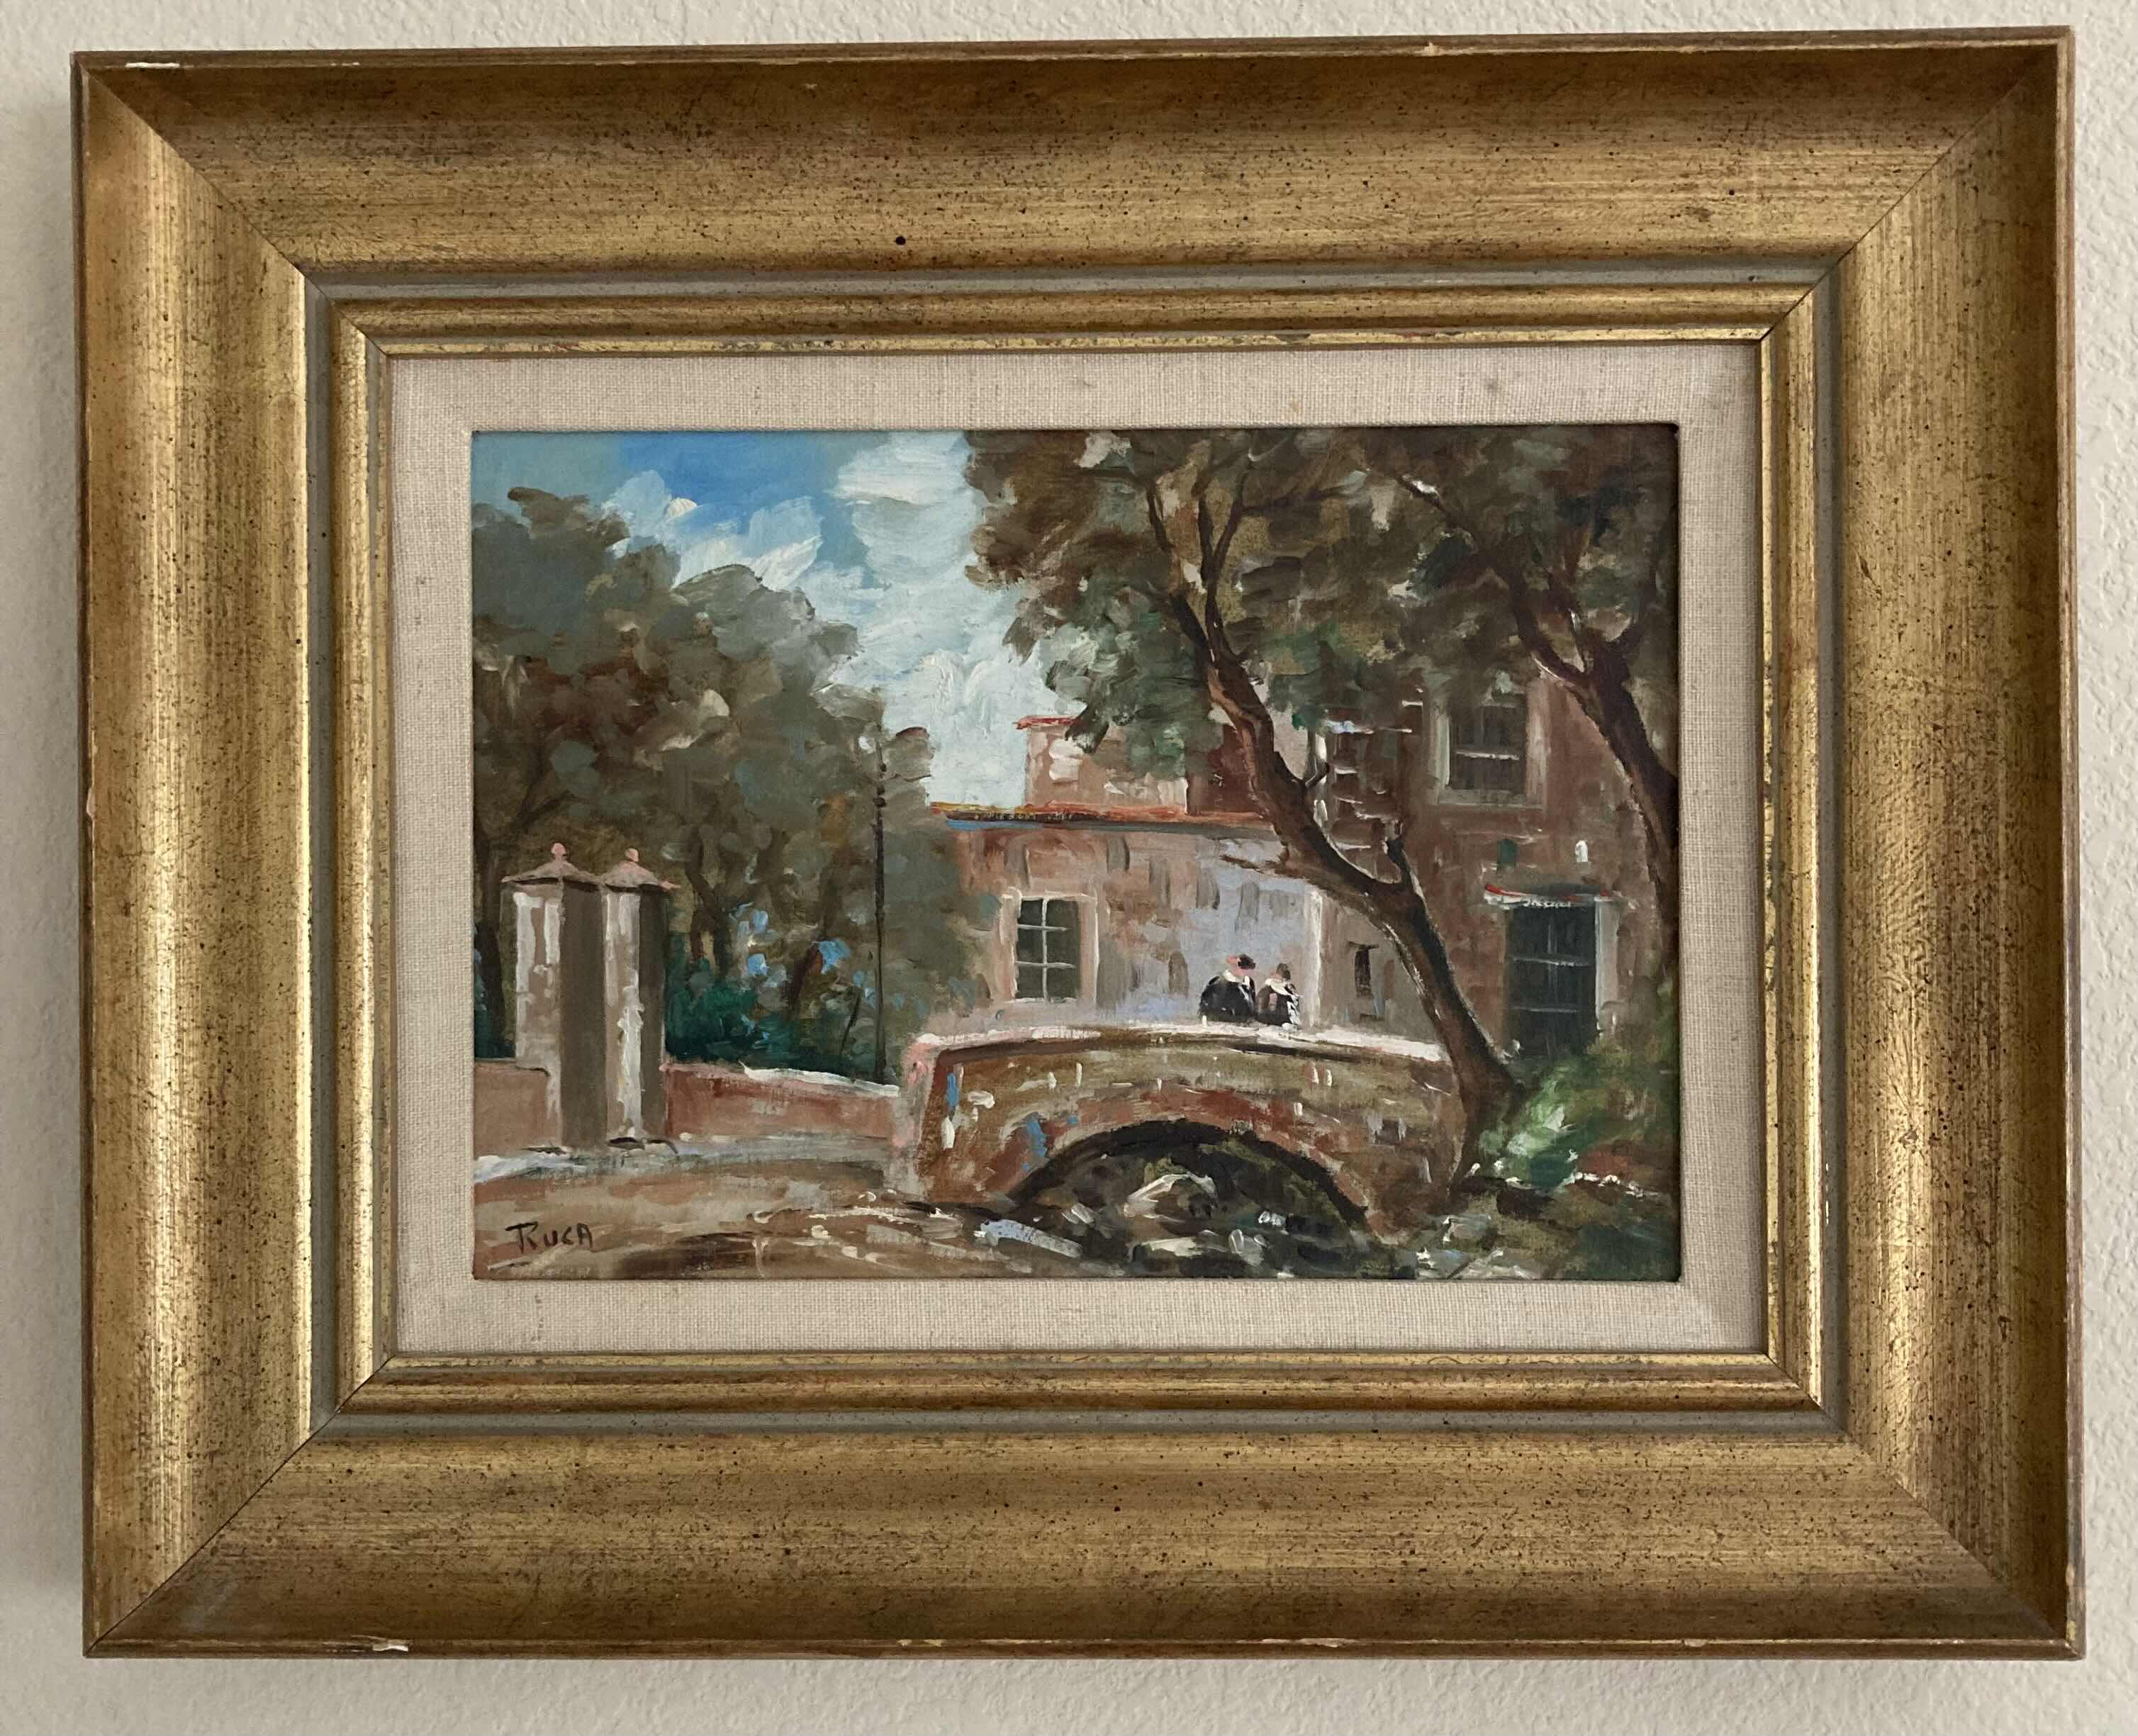 Photo 1 of EARLY CENTURY TOWN OIL PAINTING FRAMED CANVAS ARTWORK SIGNED BY RUCA 21.25” X 17”